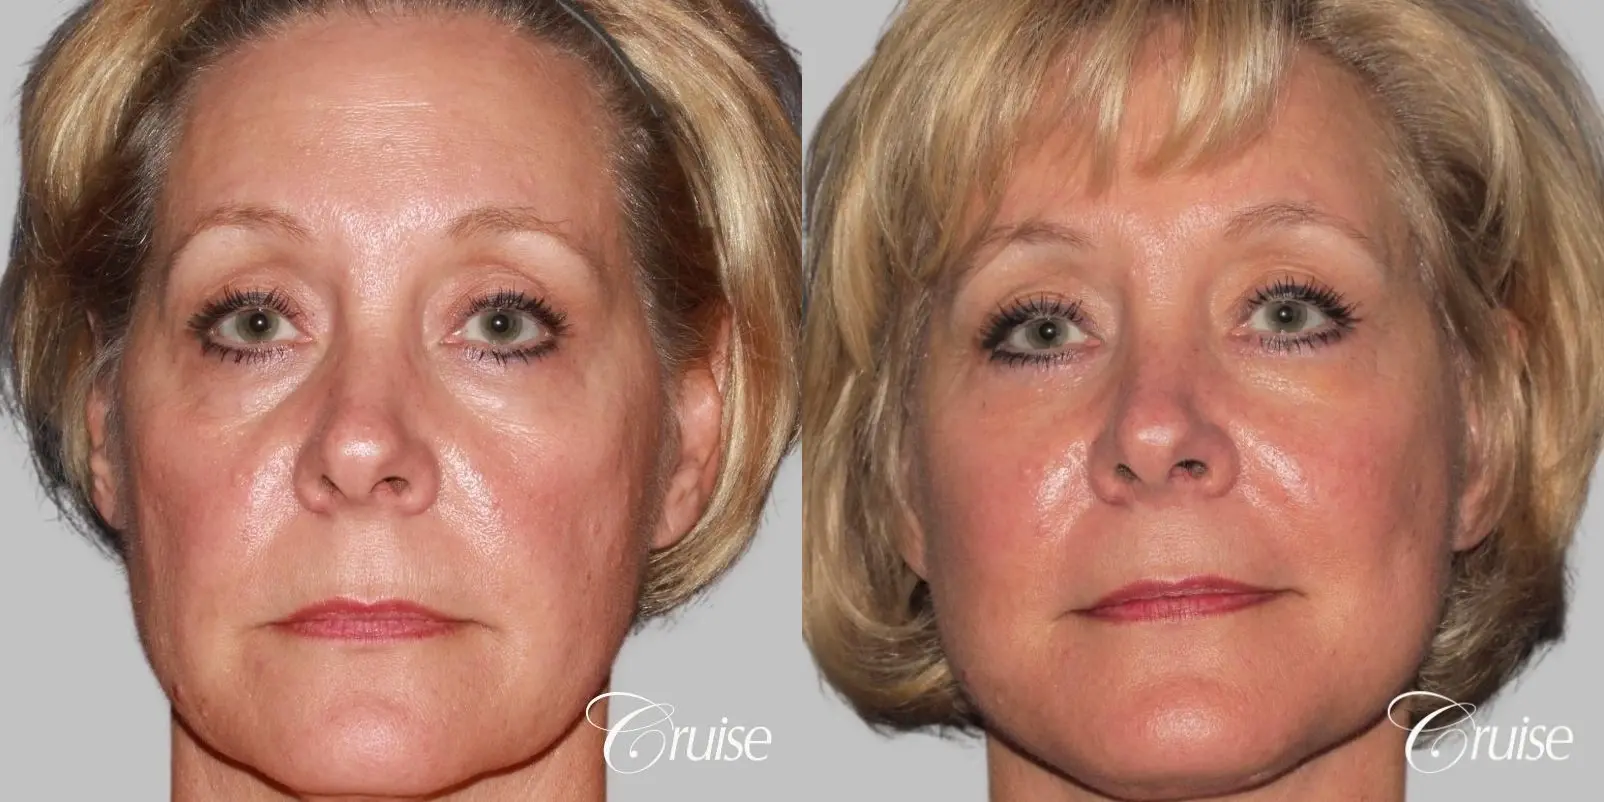 Female Facelift, Temple Lift, Fat Transfer, Neck Lift - Before and After  